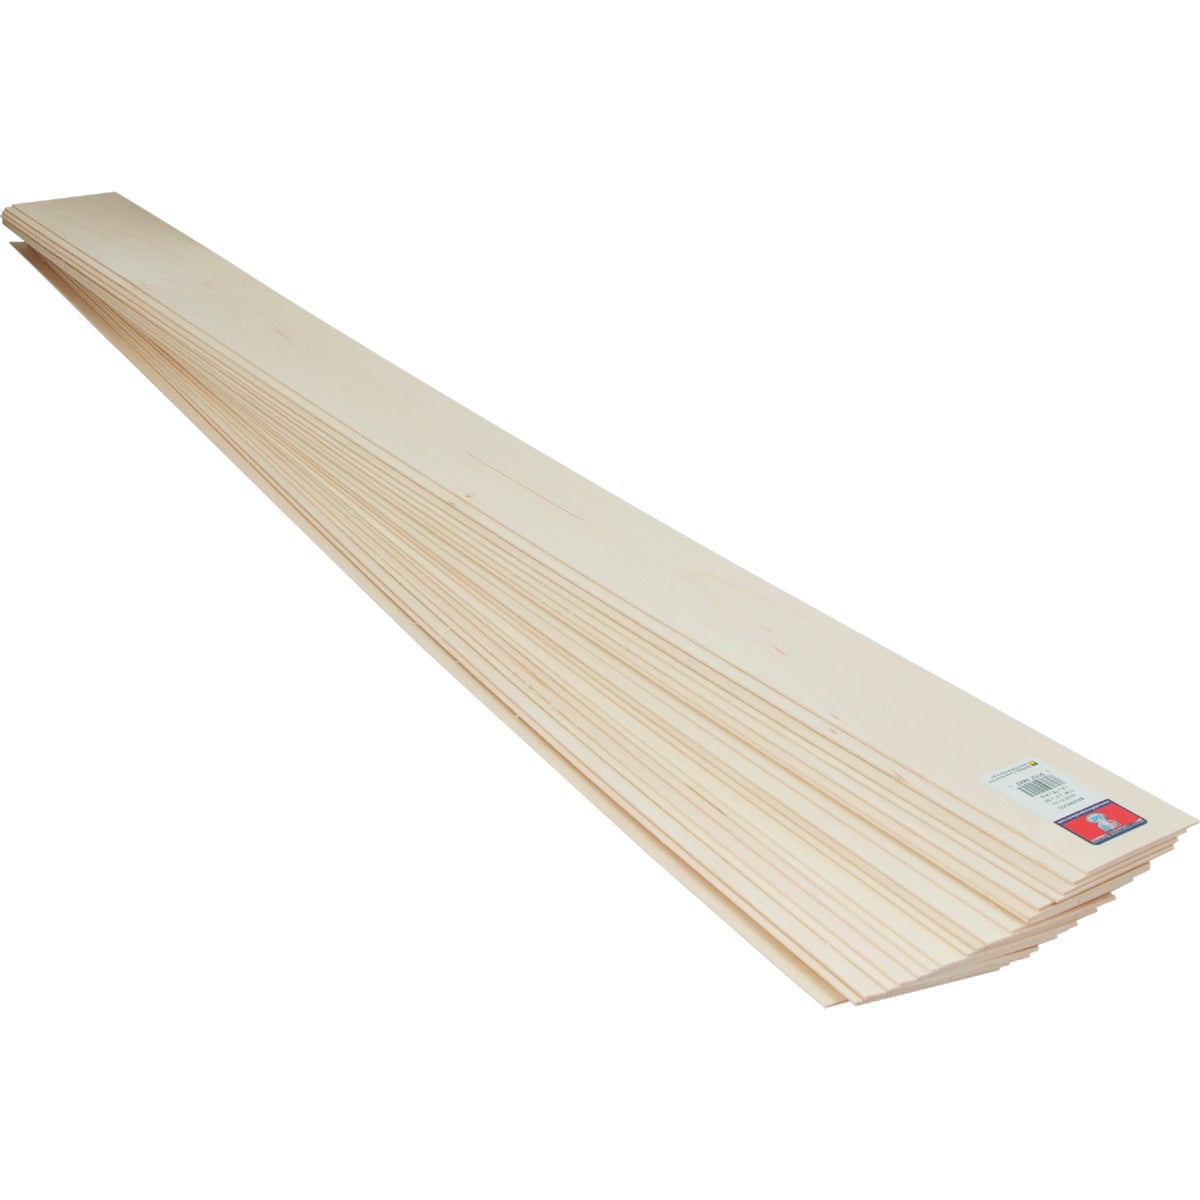 Midwest Products 1/16 In. x 4 In. x 3 Ft. Basswood Board